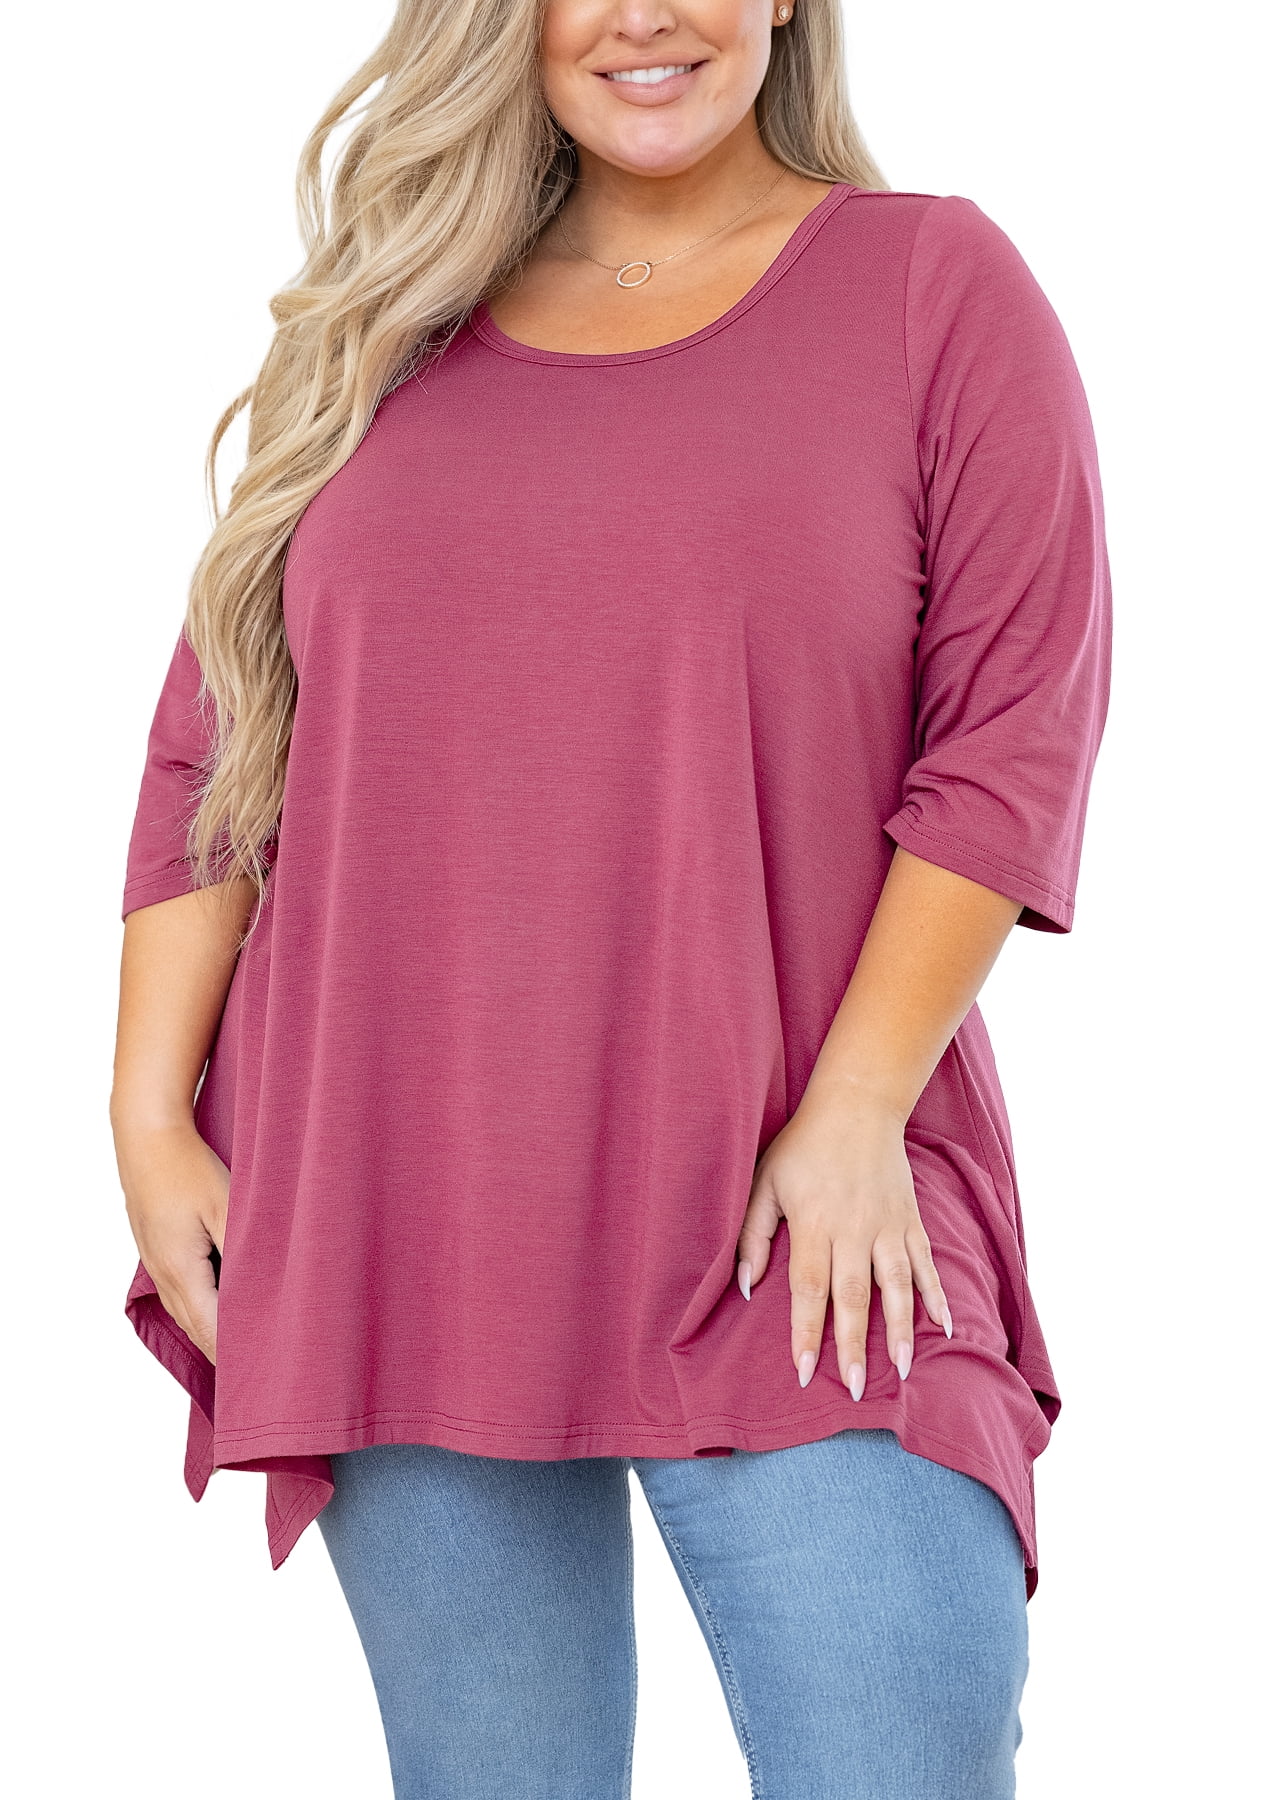 SHOWMALL Plus Size Women Top 3/4 Sleeve Clothes Purple Red 4X